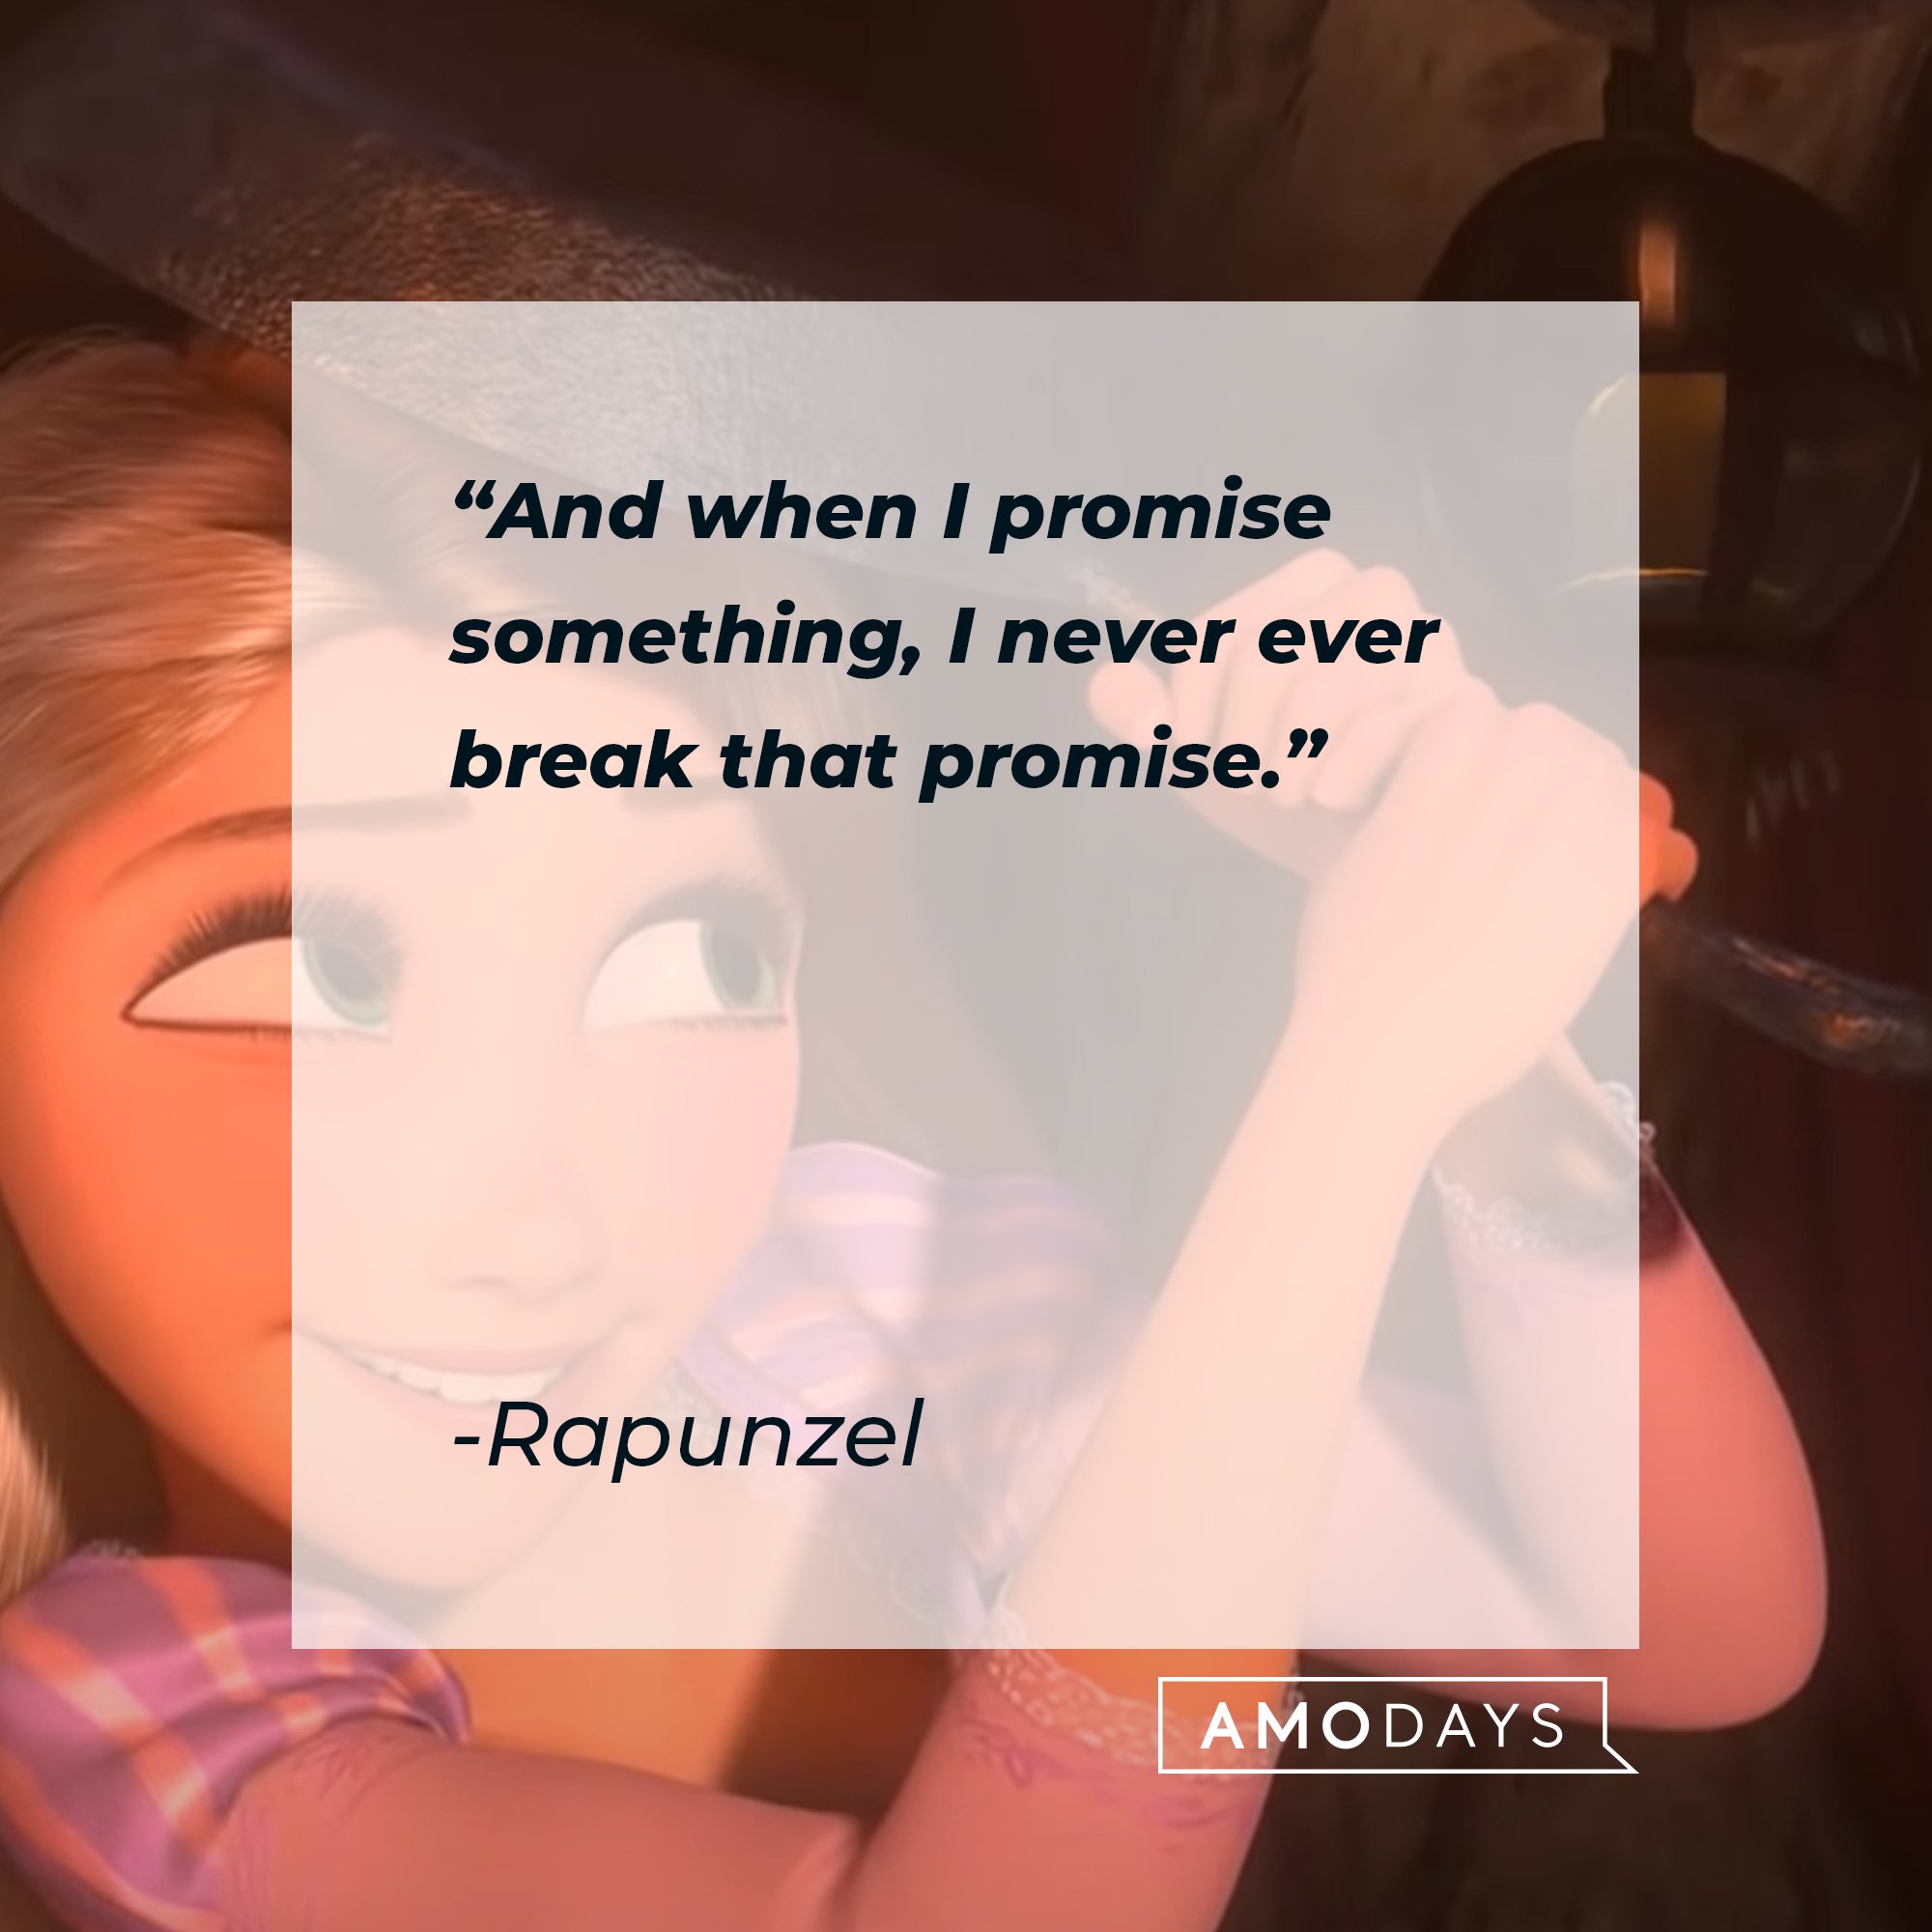 Rapunzel's quote: "And when I promise something, I never ever break that promise." | Image: AmoDays